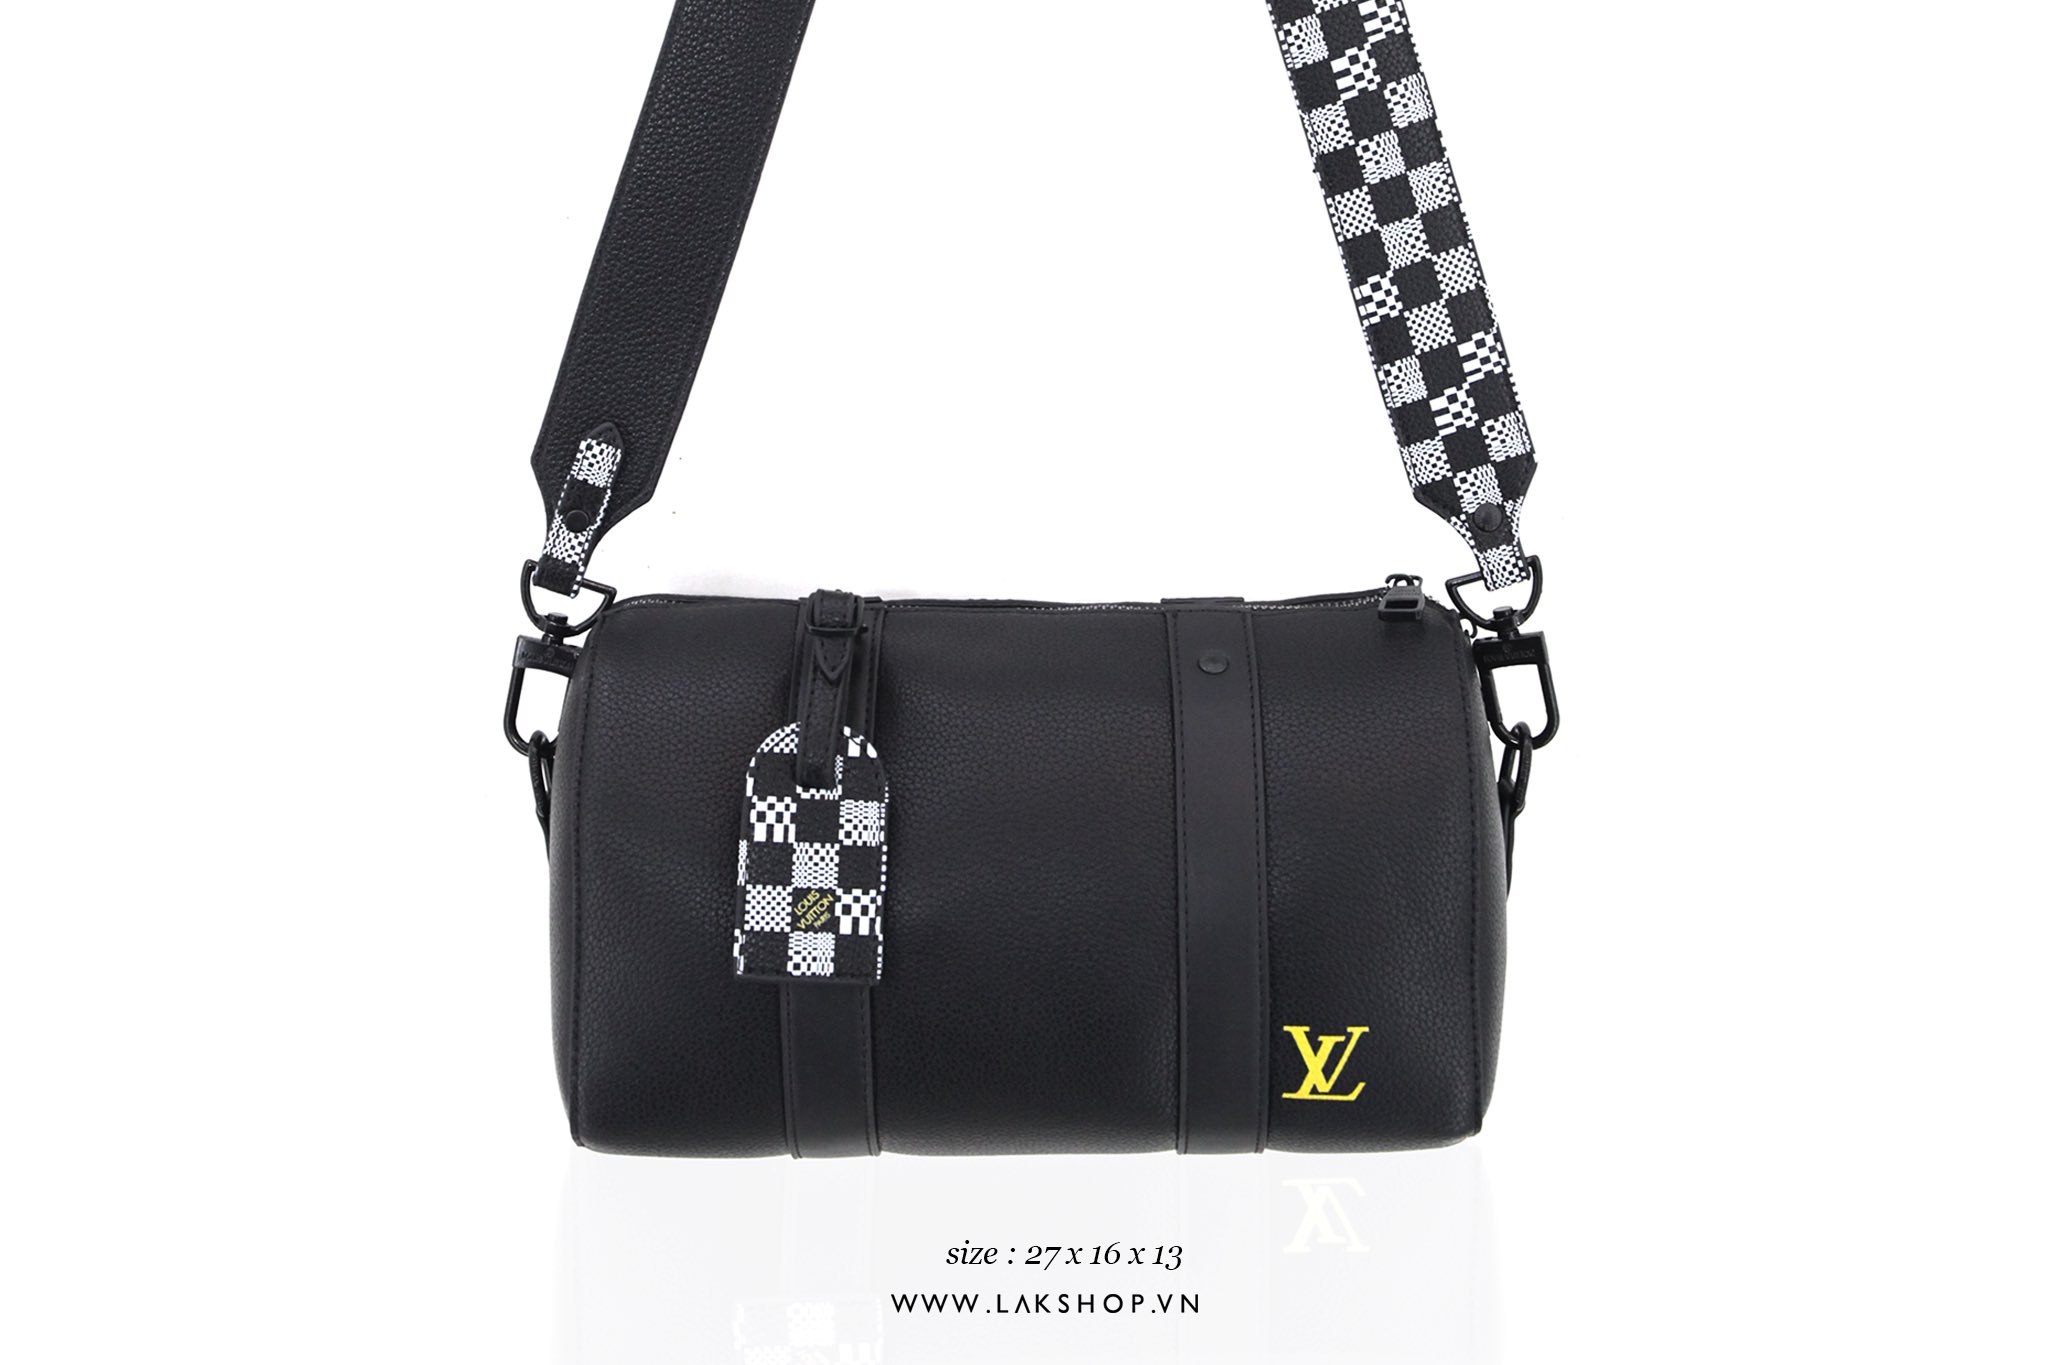 Louis Vuitton City Keepall Black with Checkerboard Bag